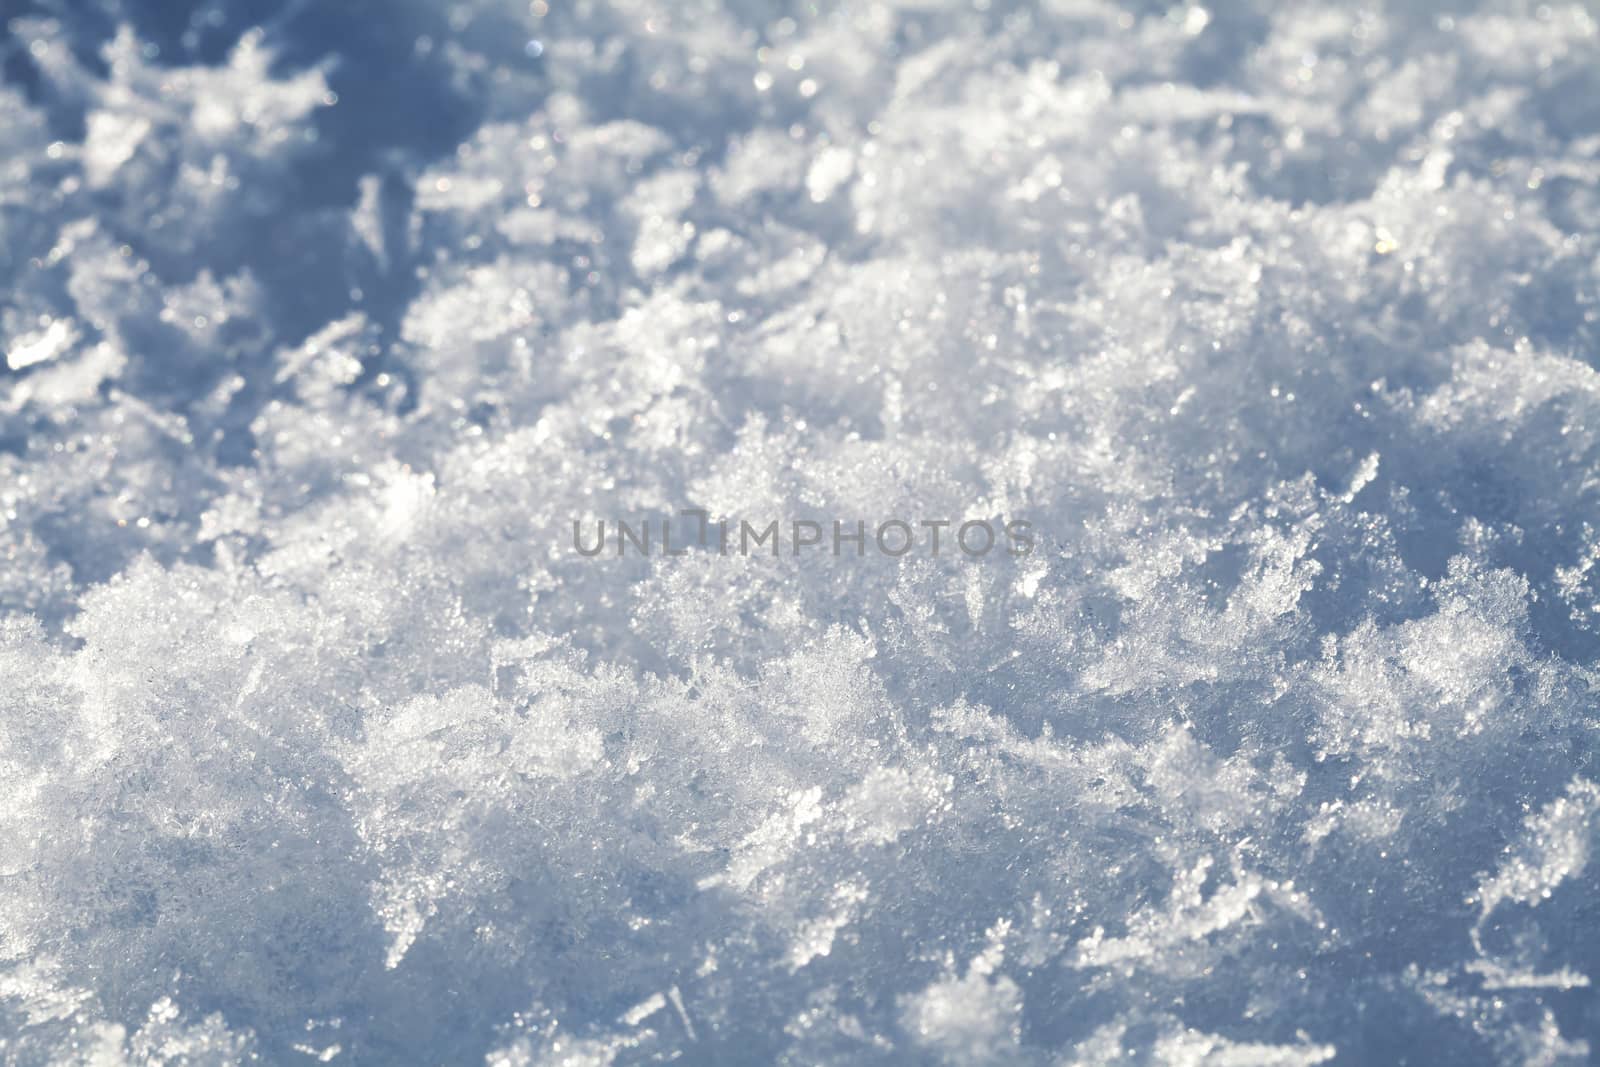 Macro shot of snow crystals, side view